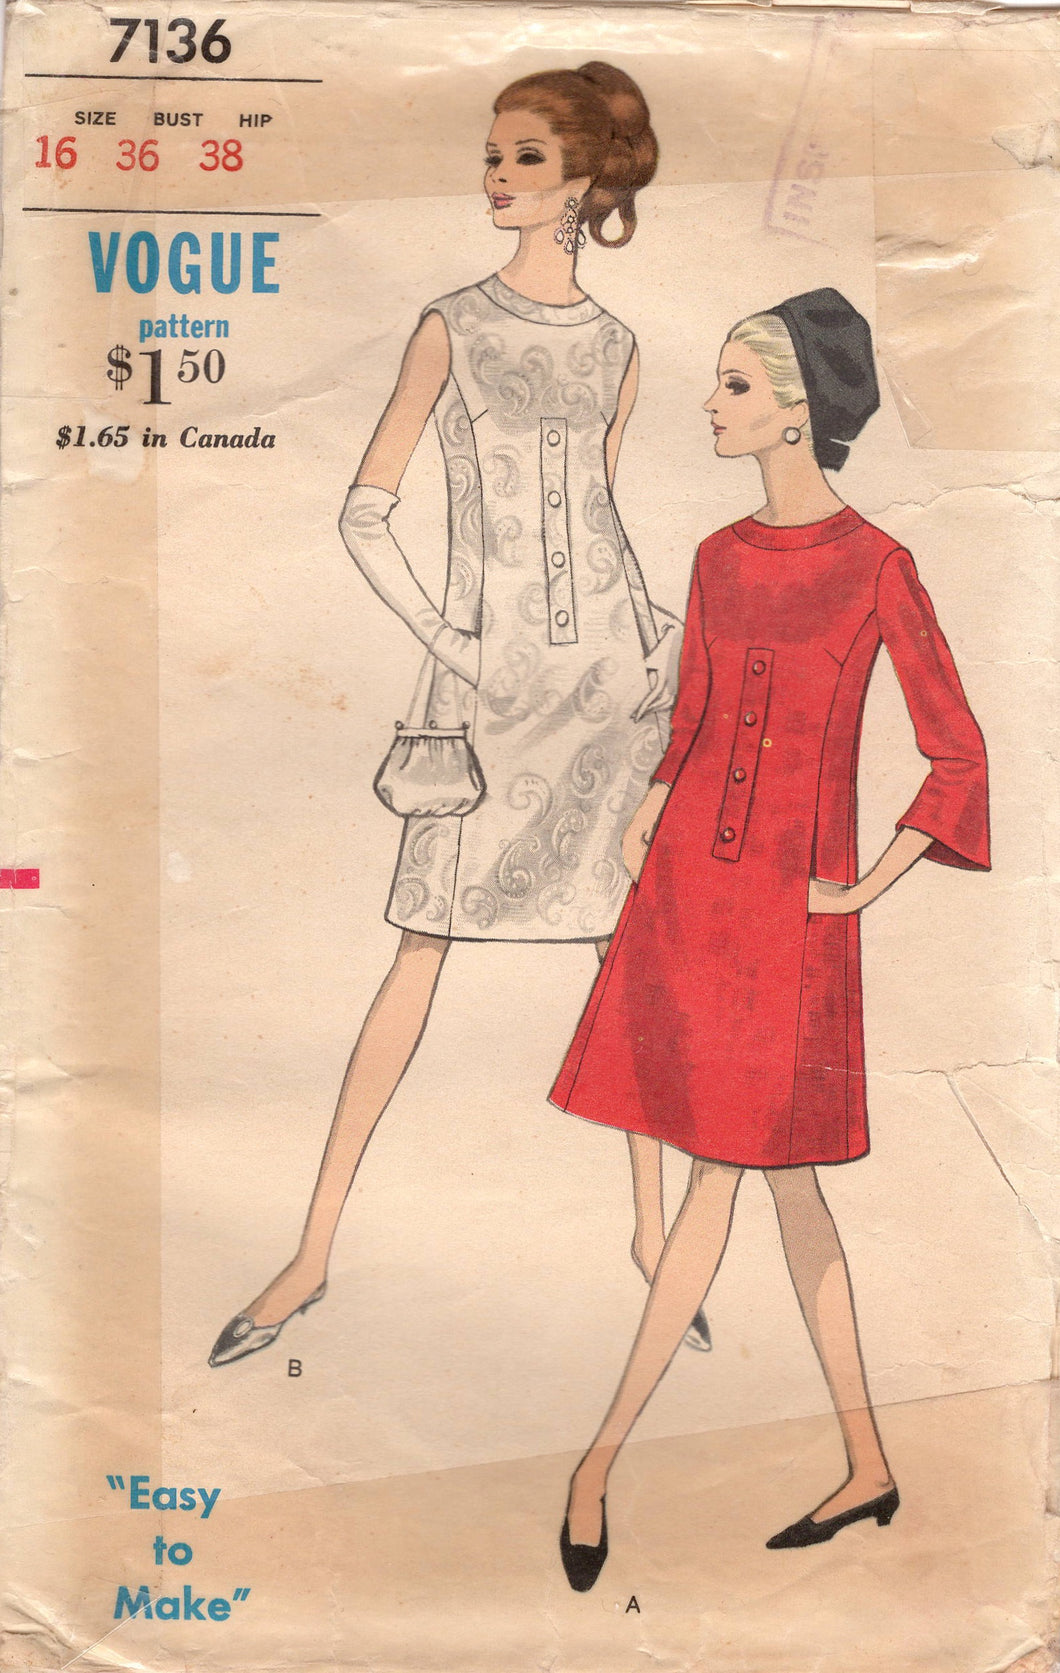 1960's Vogue One Piece Shift Dress with Button Accent with or without Sleeves - Bust 36